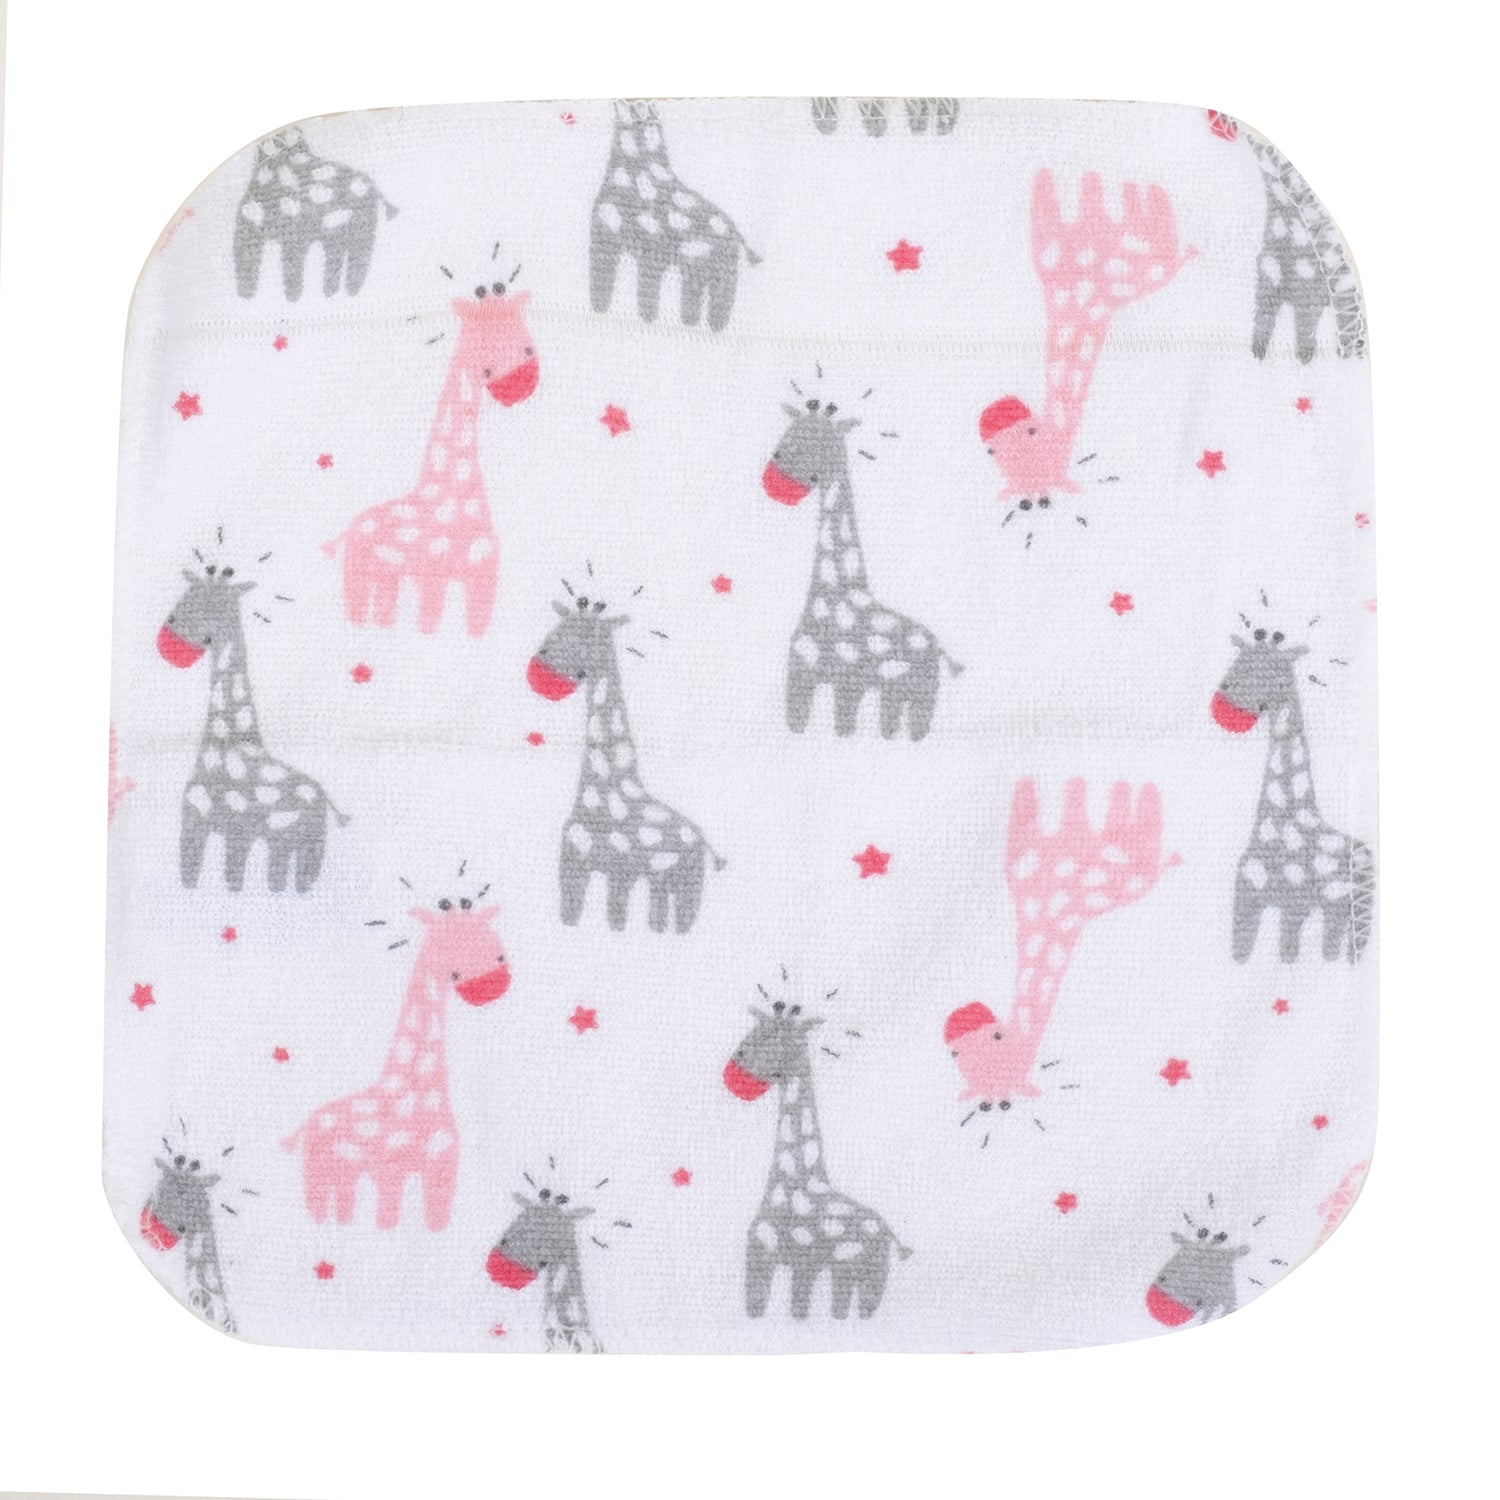 Baby Moo Star And Giraffe Soft And Absorbent Handkerchief Napkins For Infant Face And Body Pack Of 12 Wash Cloth - Pink